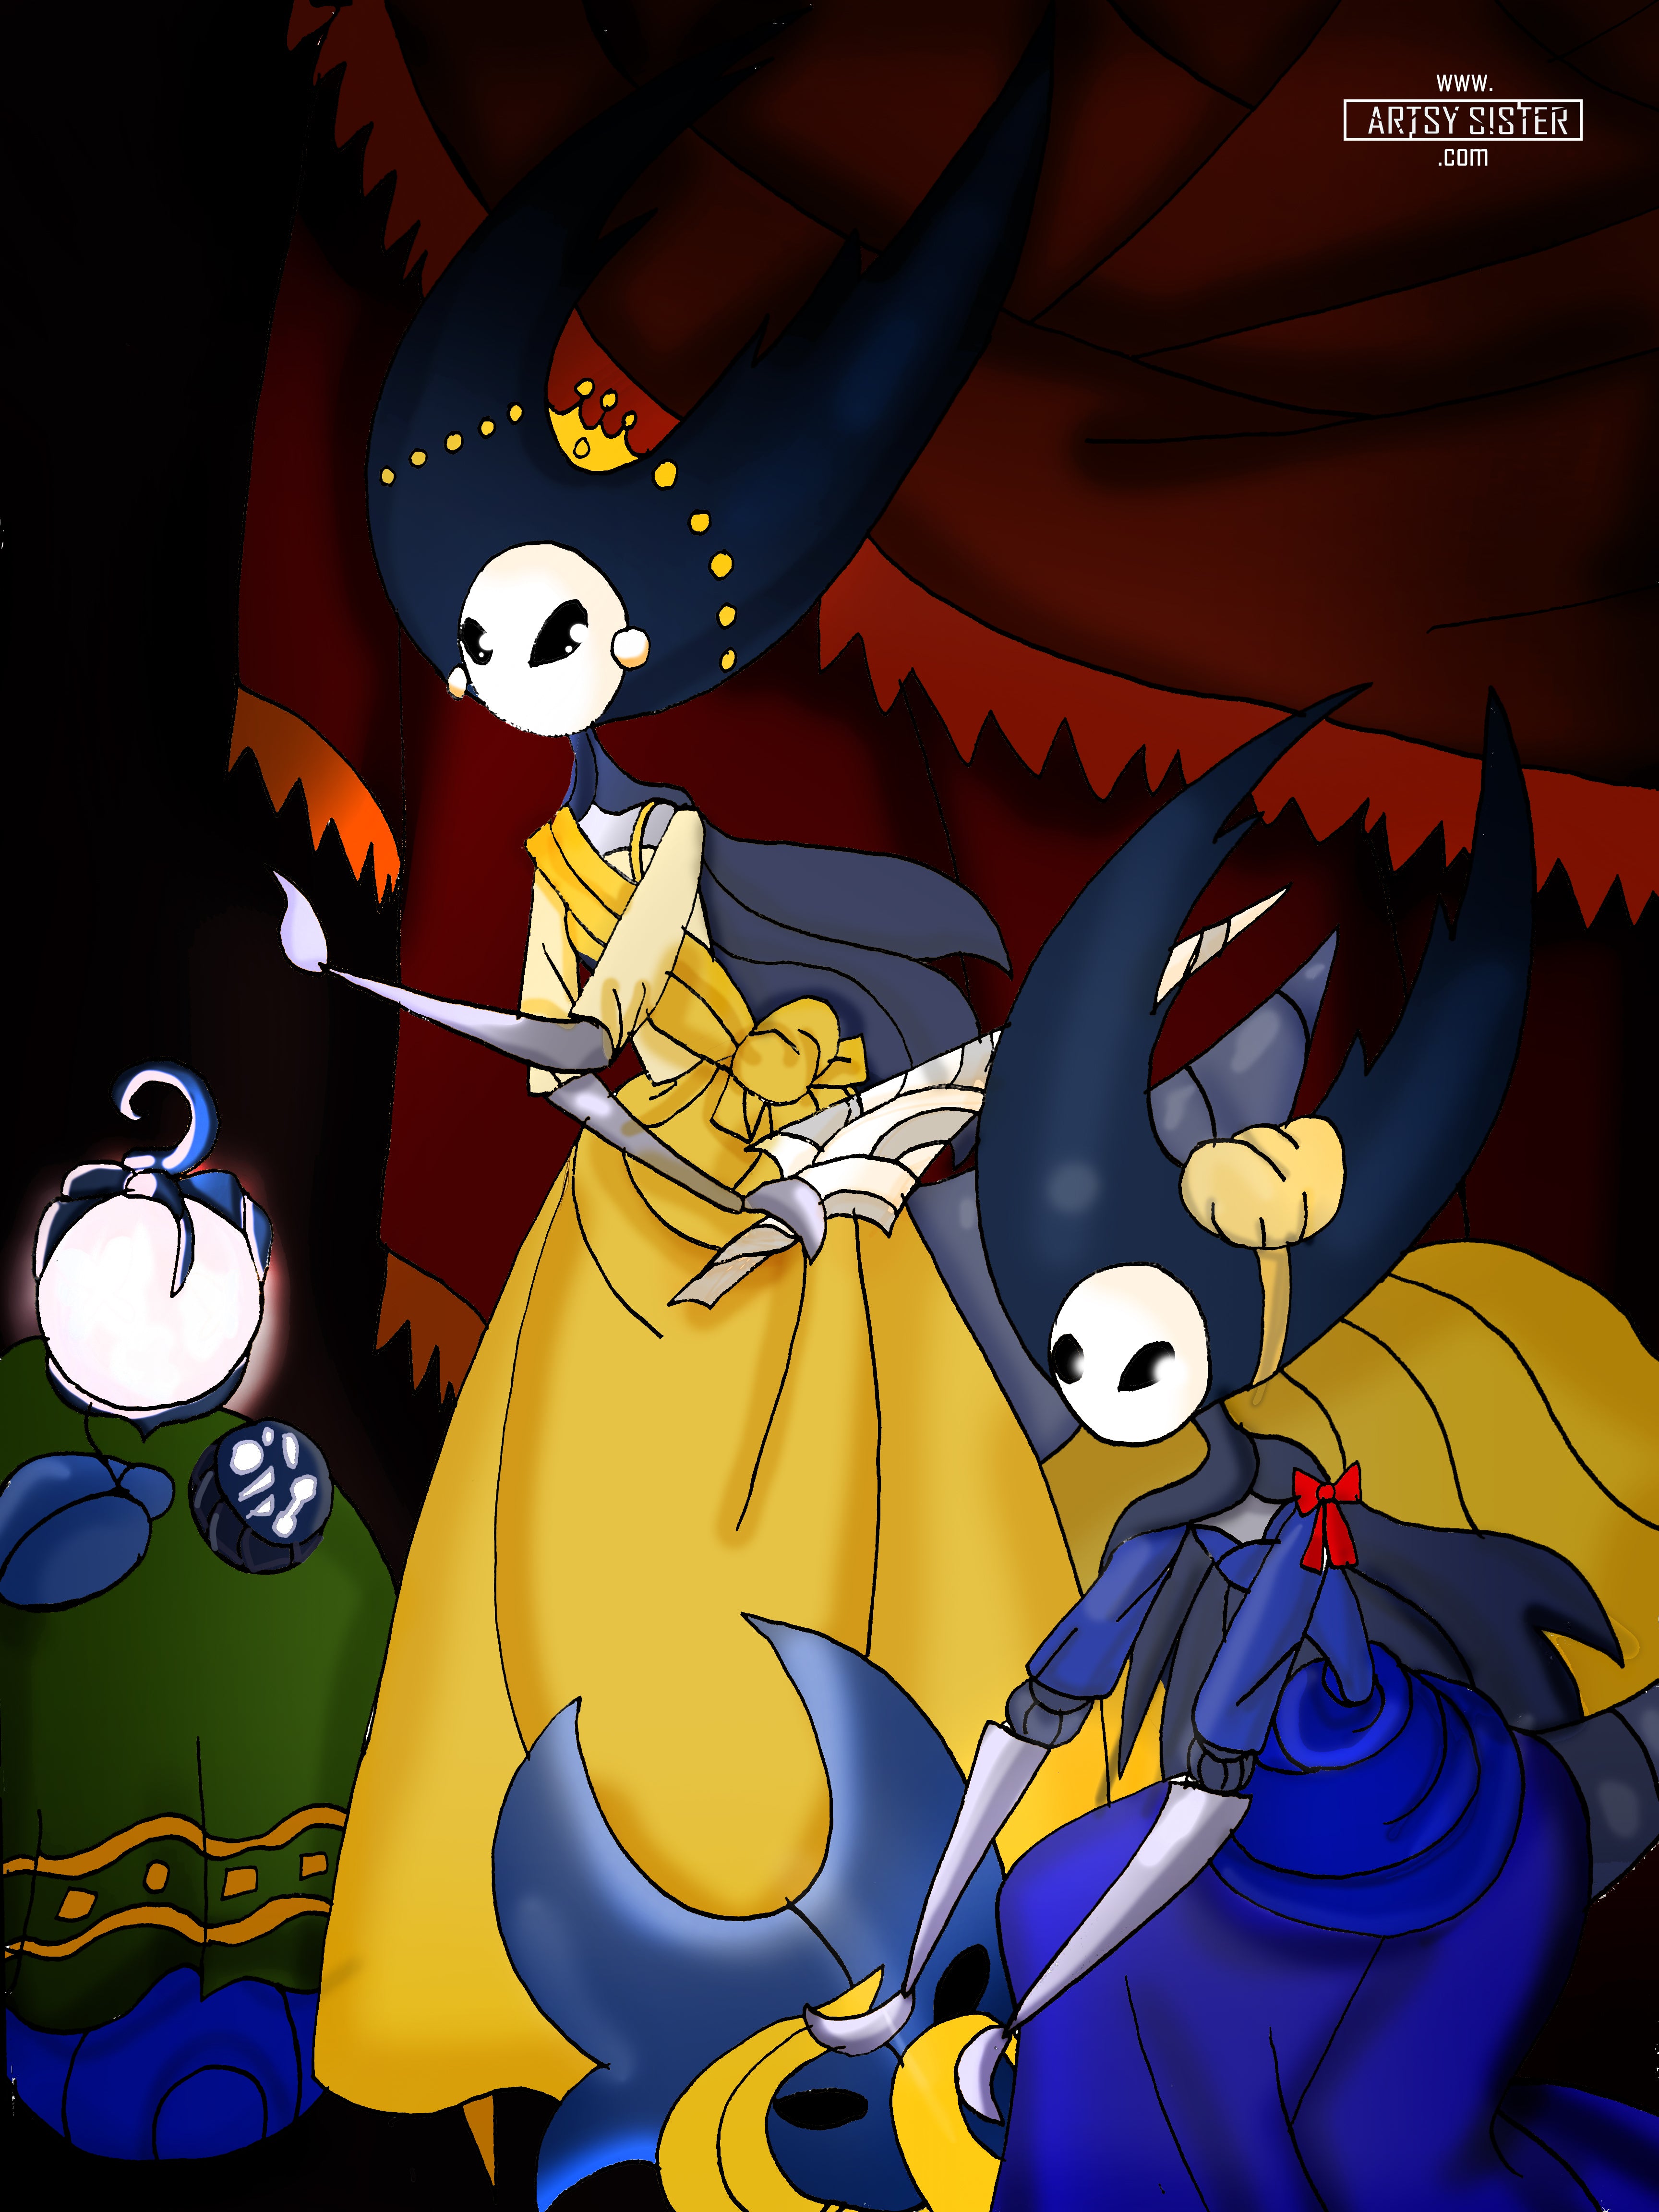 artsy sister, hollow knight fanart, judith with the head of holofernes